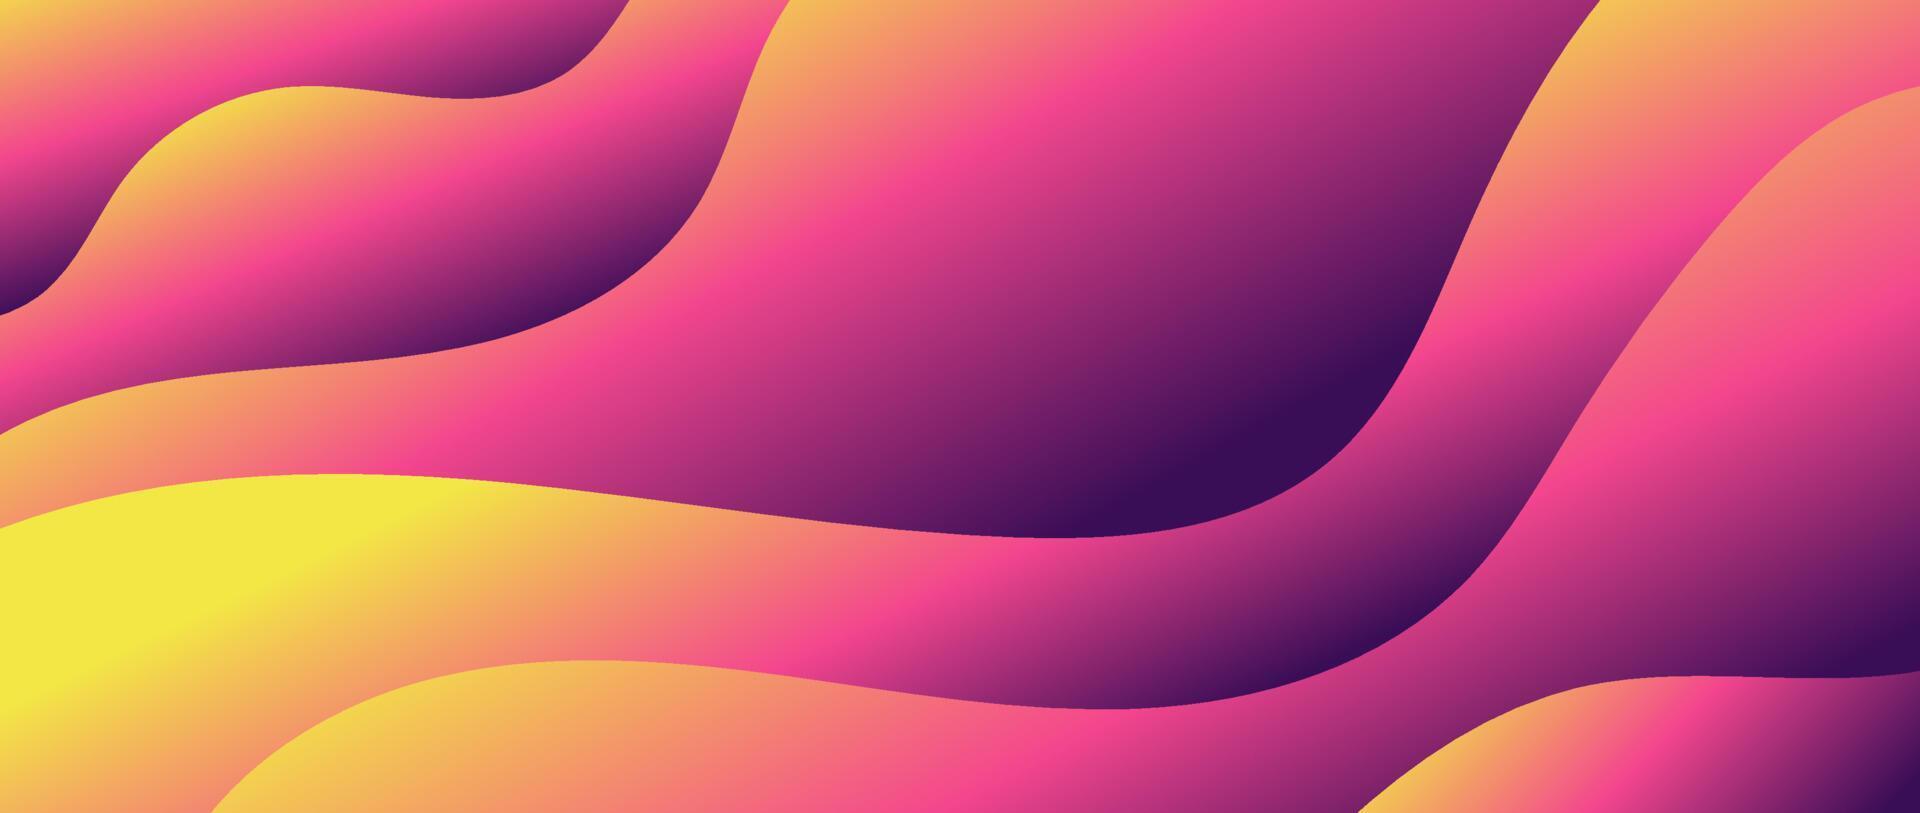 Dynamic wave gradient background vector